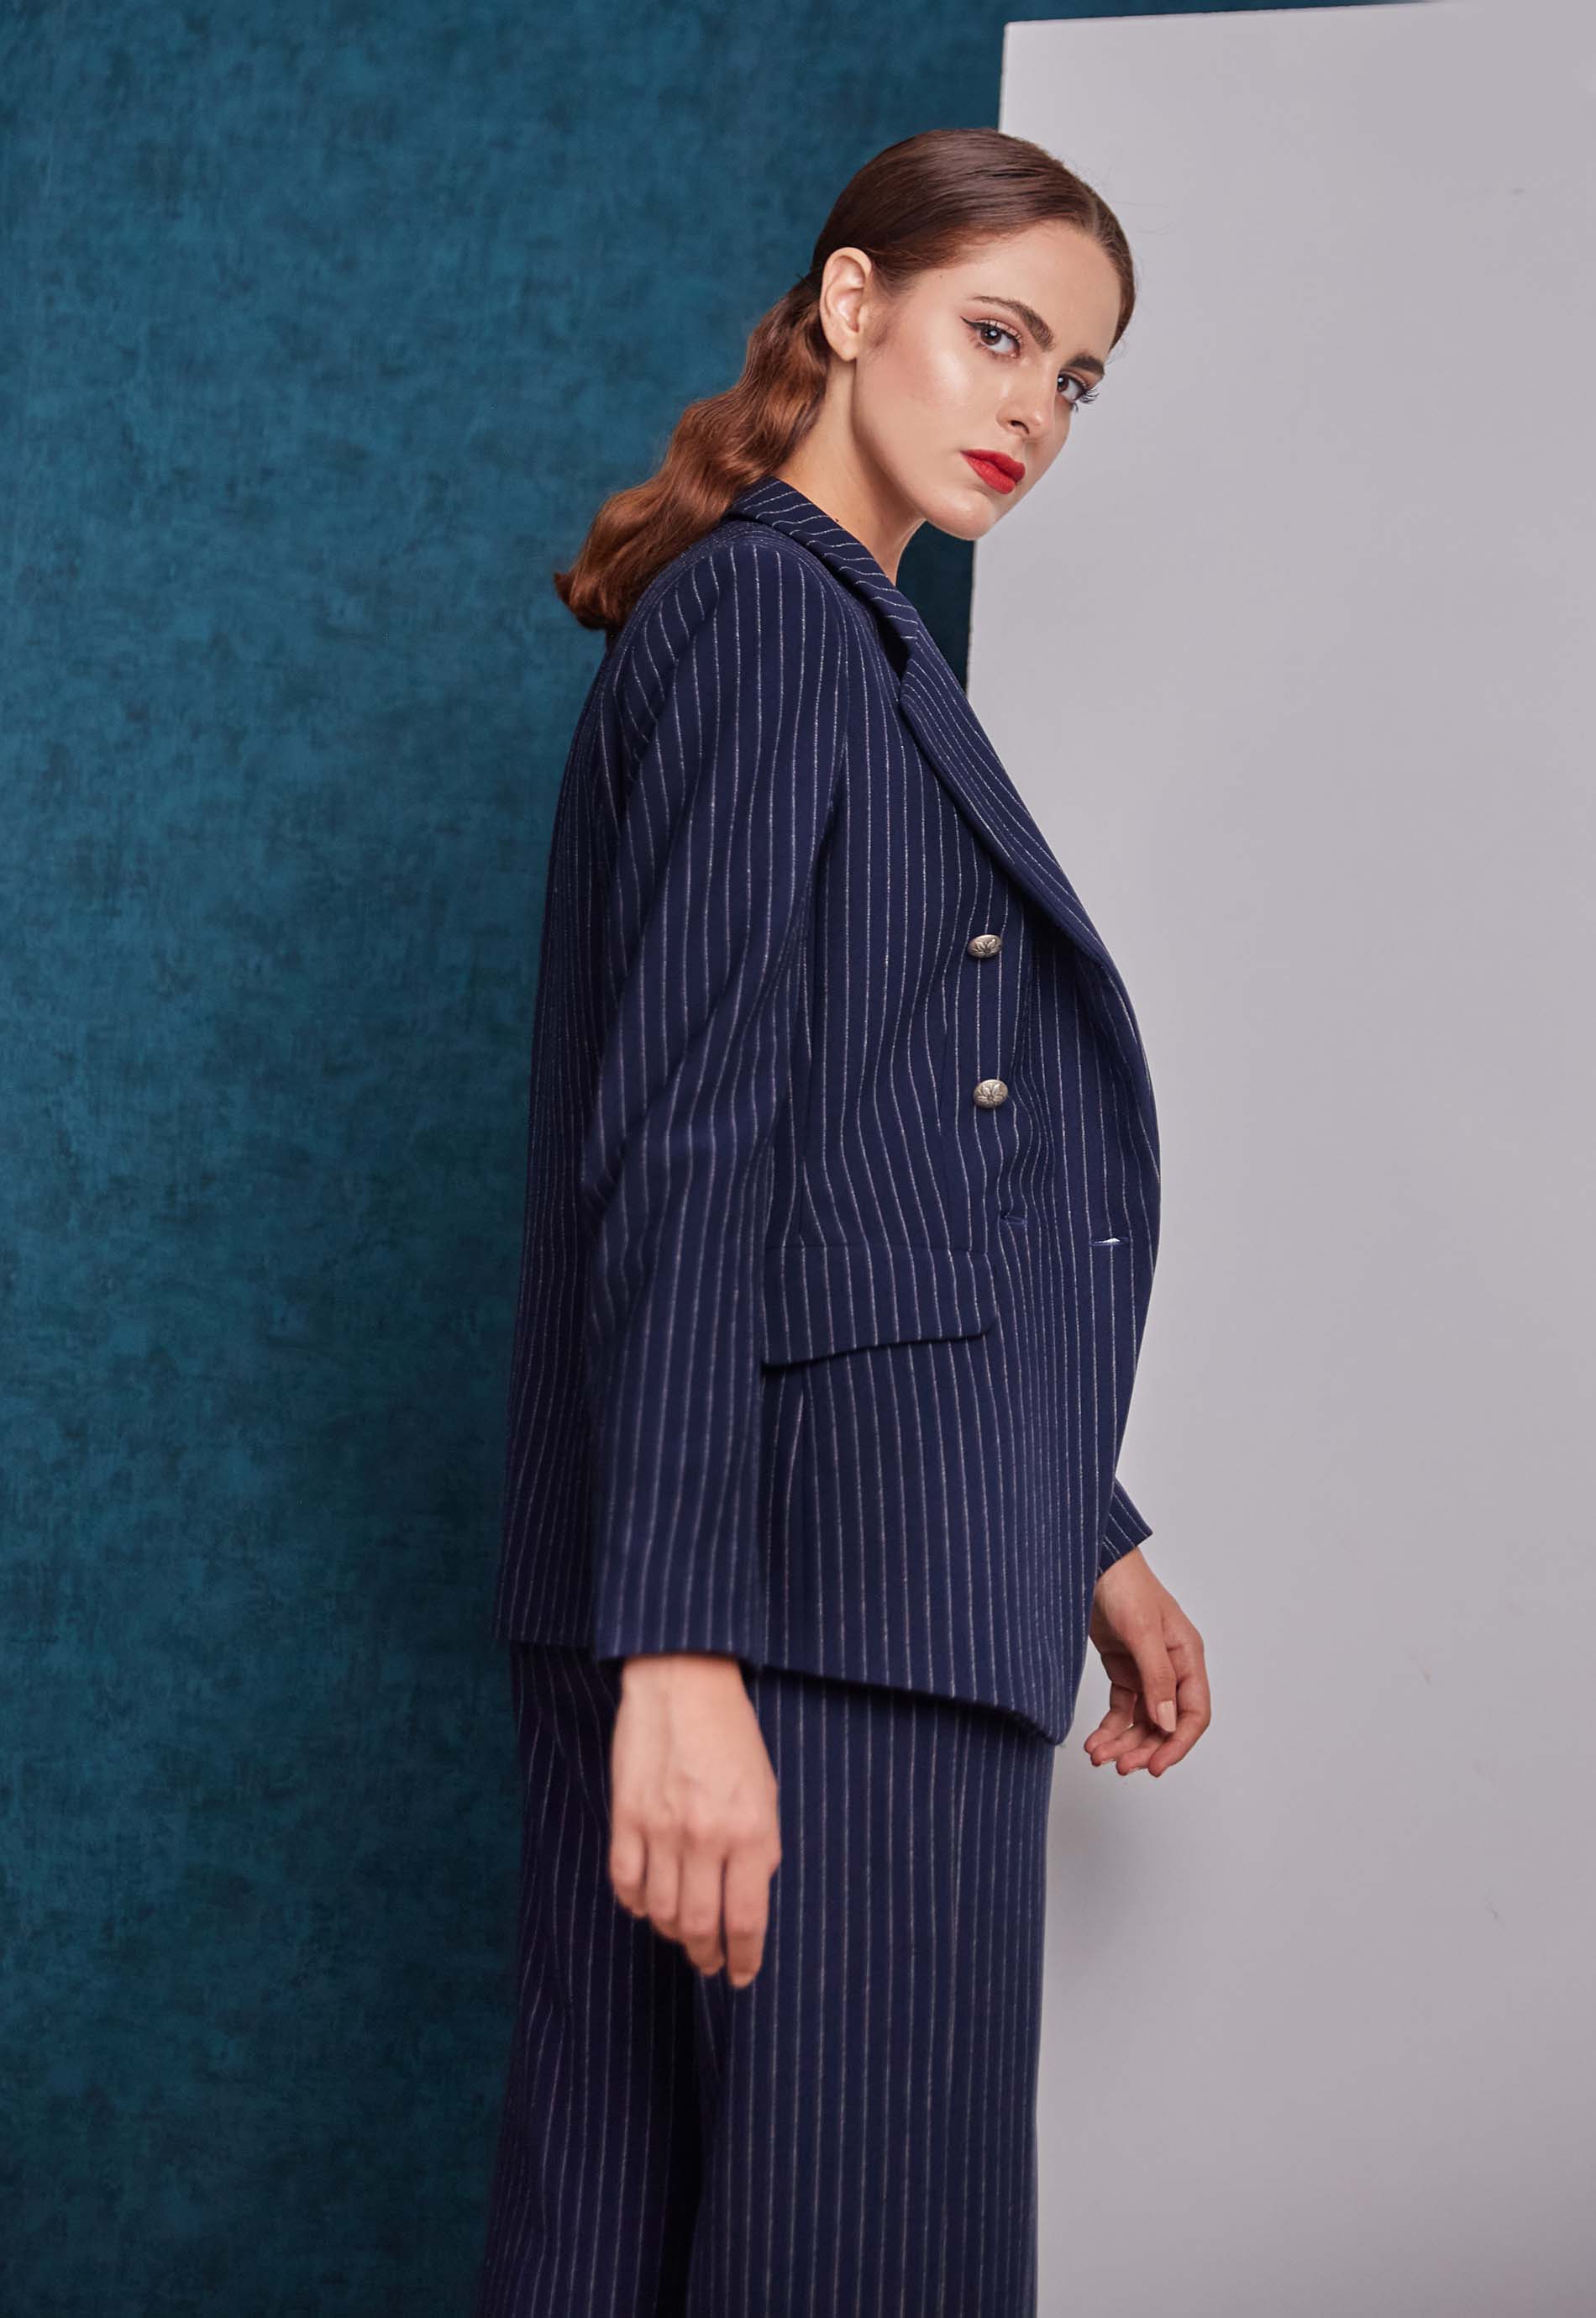 Pinstriped double breasted blue blazer